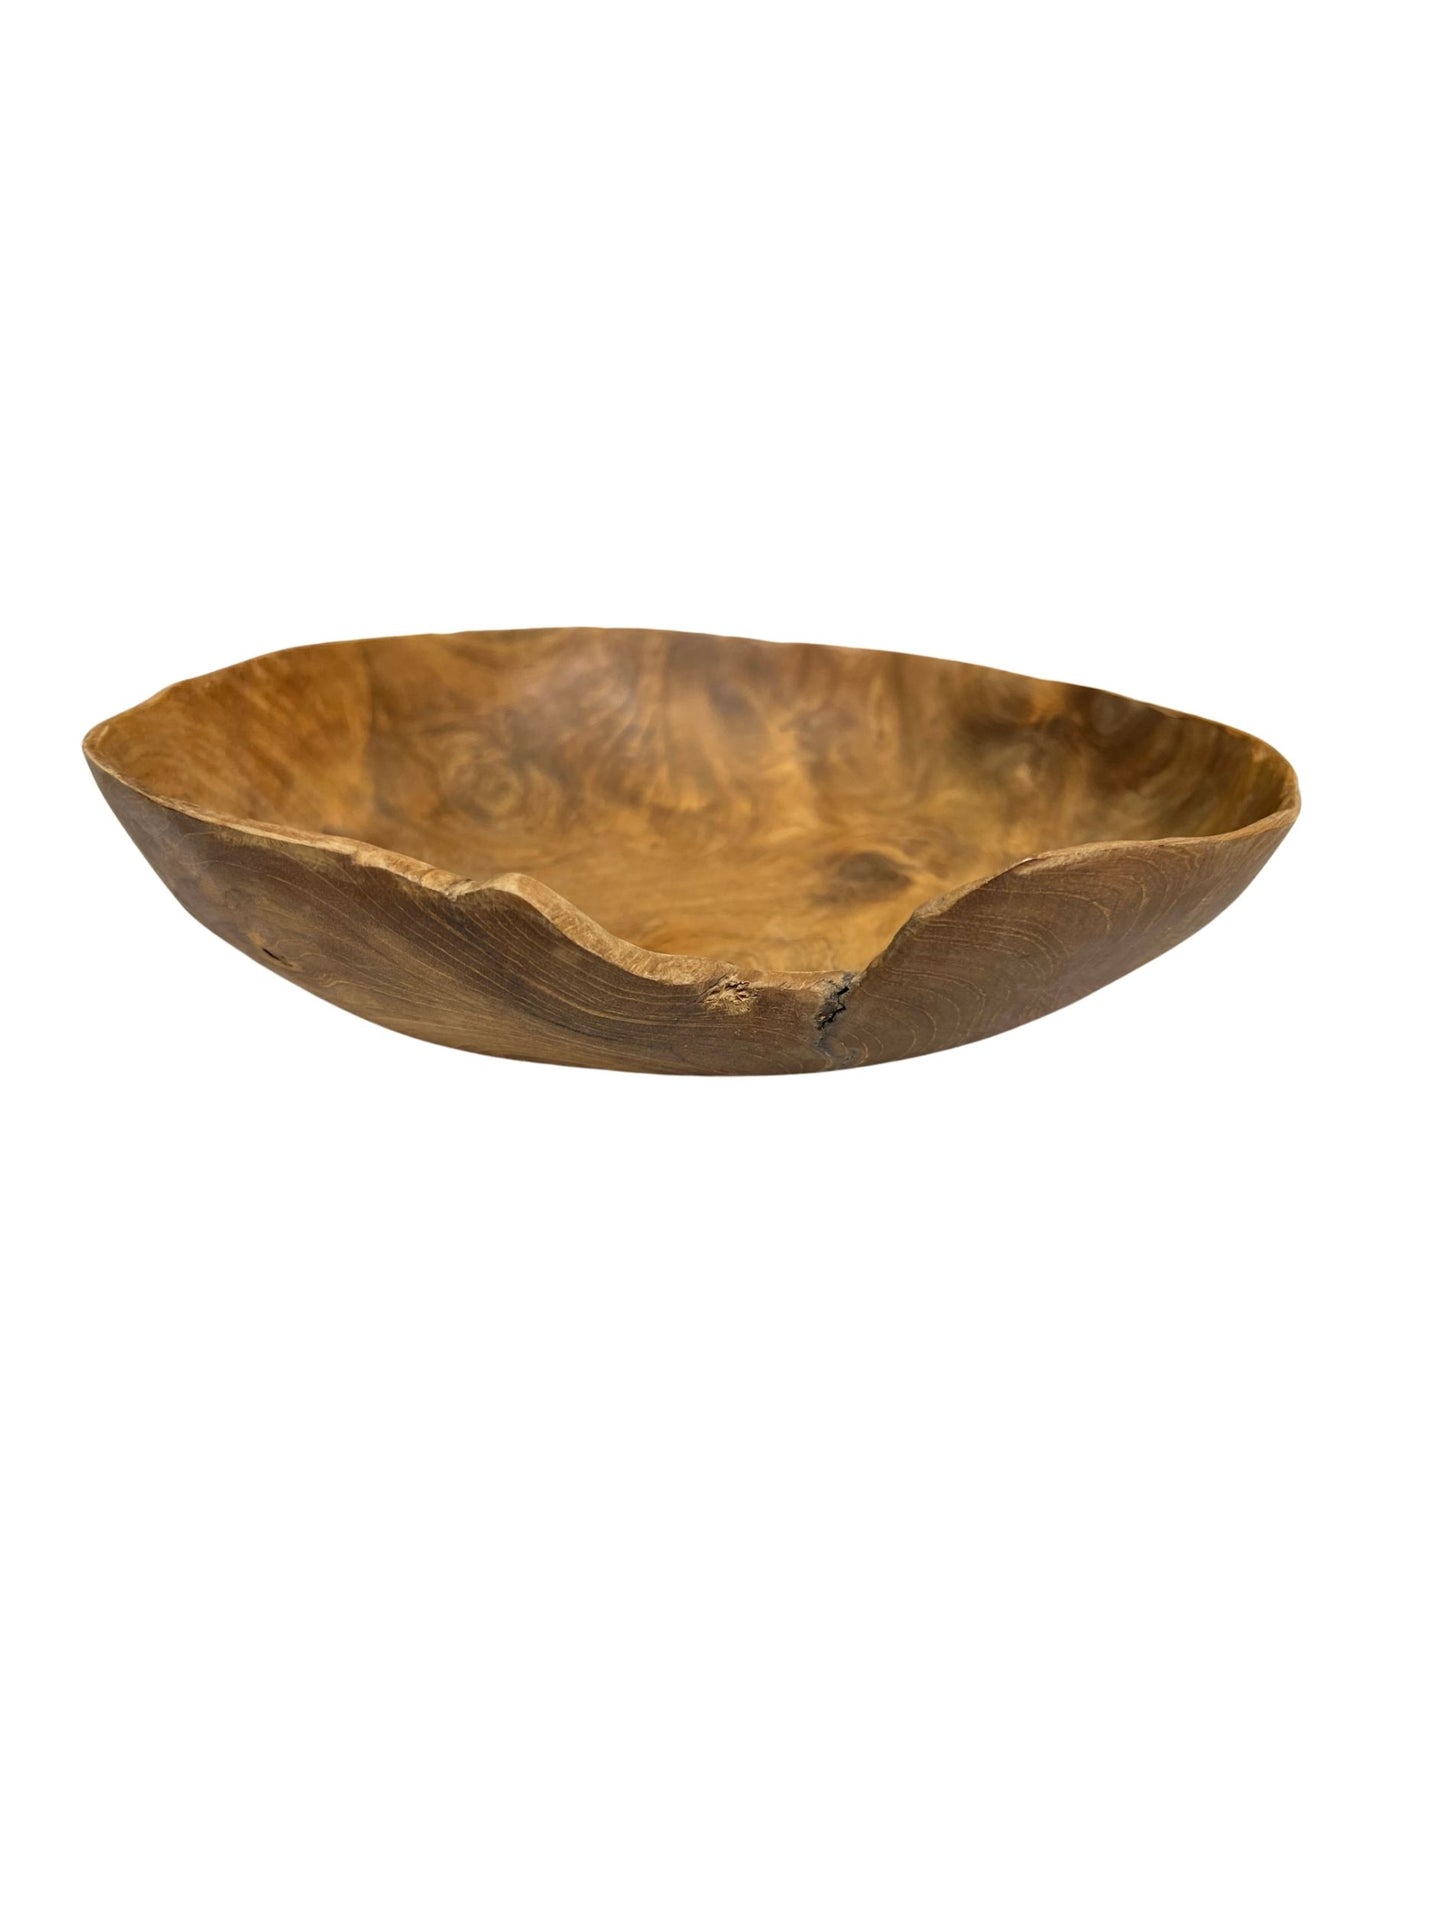 Eclectic Home Accent Shallow Teak Bowl 2947 Natural  Decor Furniture